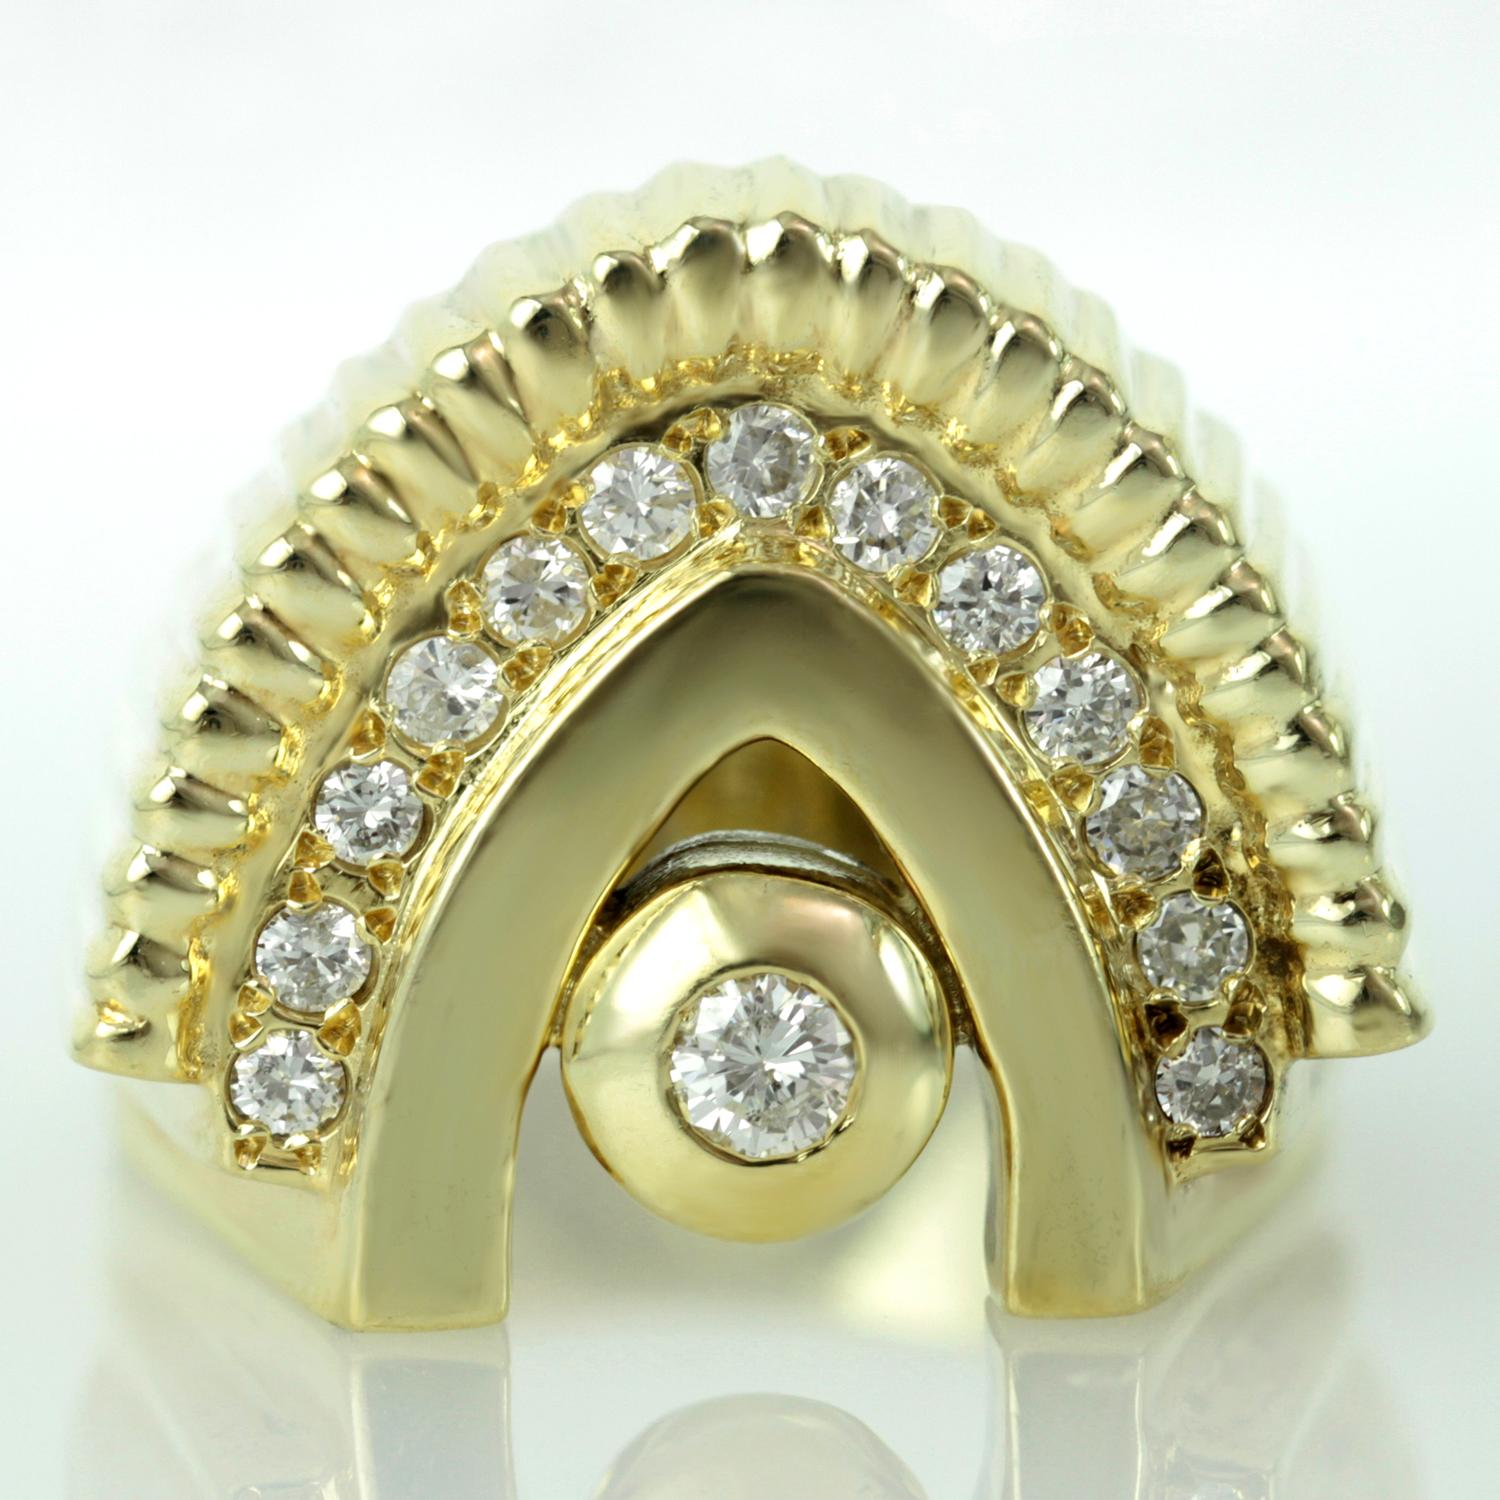 This unisex ring is made in 14k yellow gold and features a bezel-set solitaire diamond beautifully accented by a sparkling diamond-set arch design. Circa 1970s. Measurements: 0.78